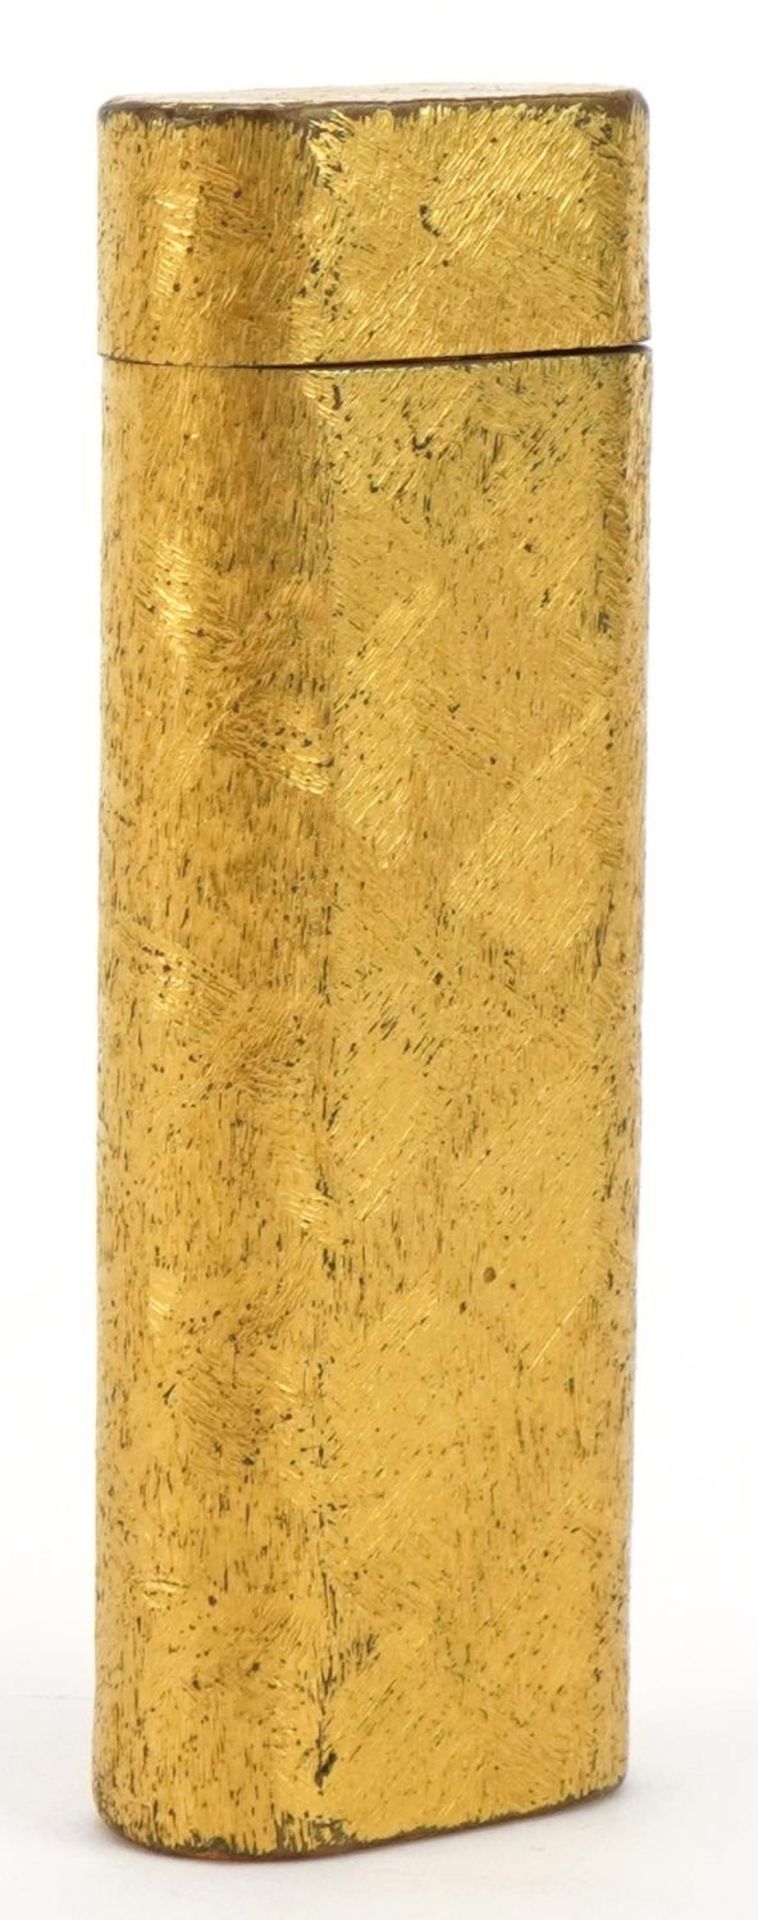 Cartier gold plated pocket lighter with fitted box, guarantee card and wallet - Image 3 of 5